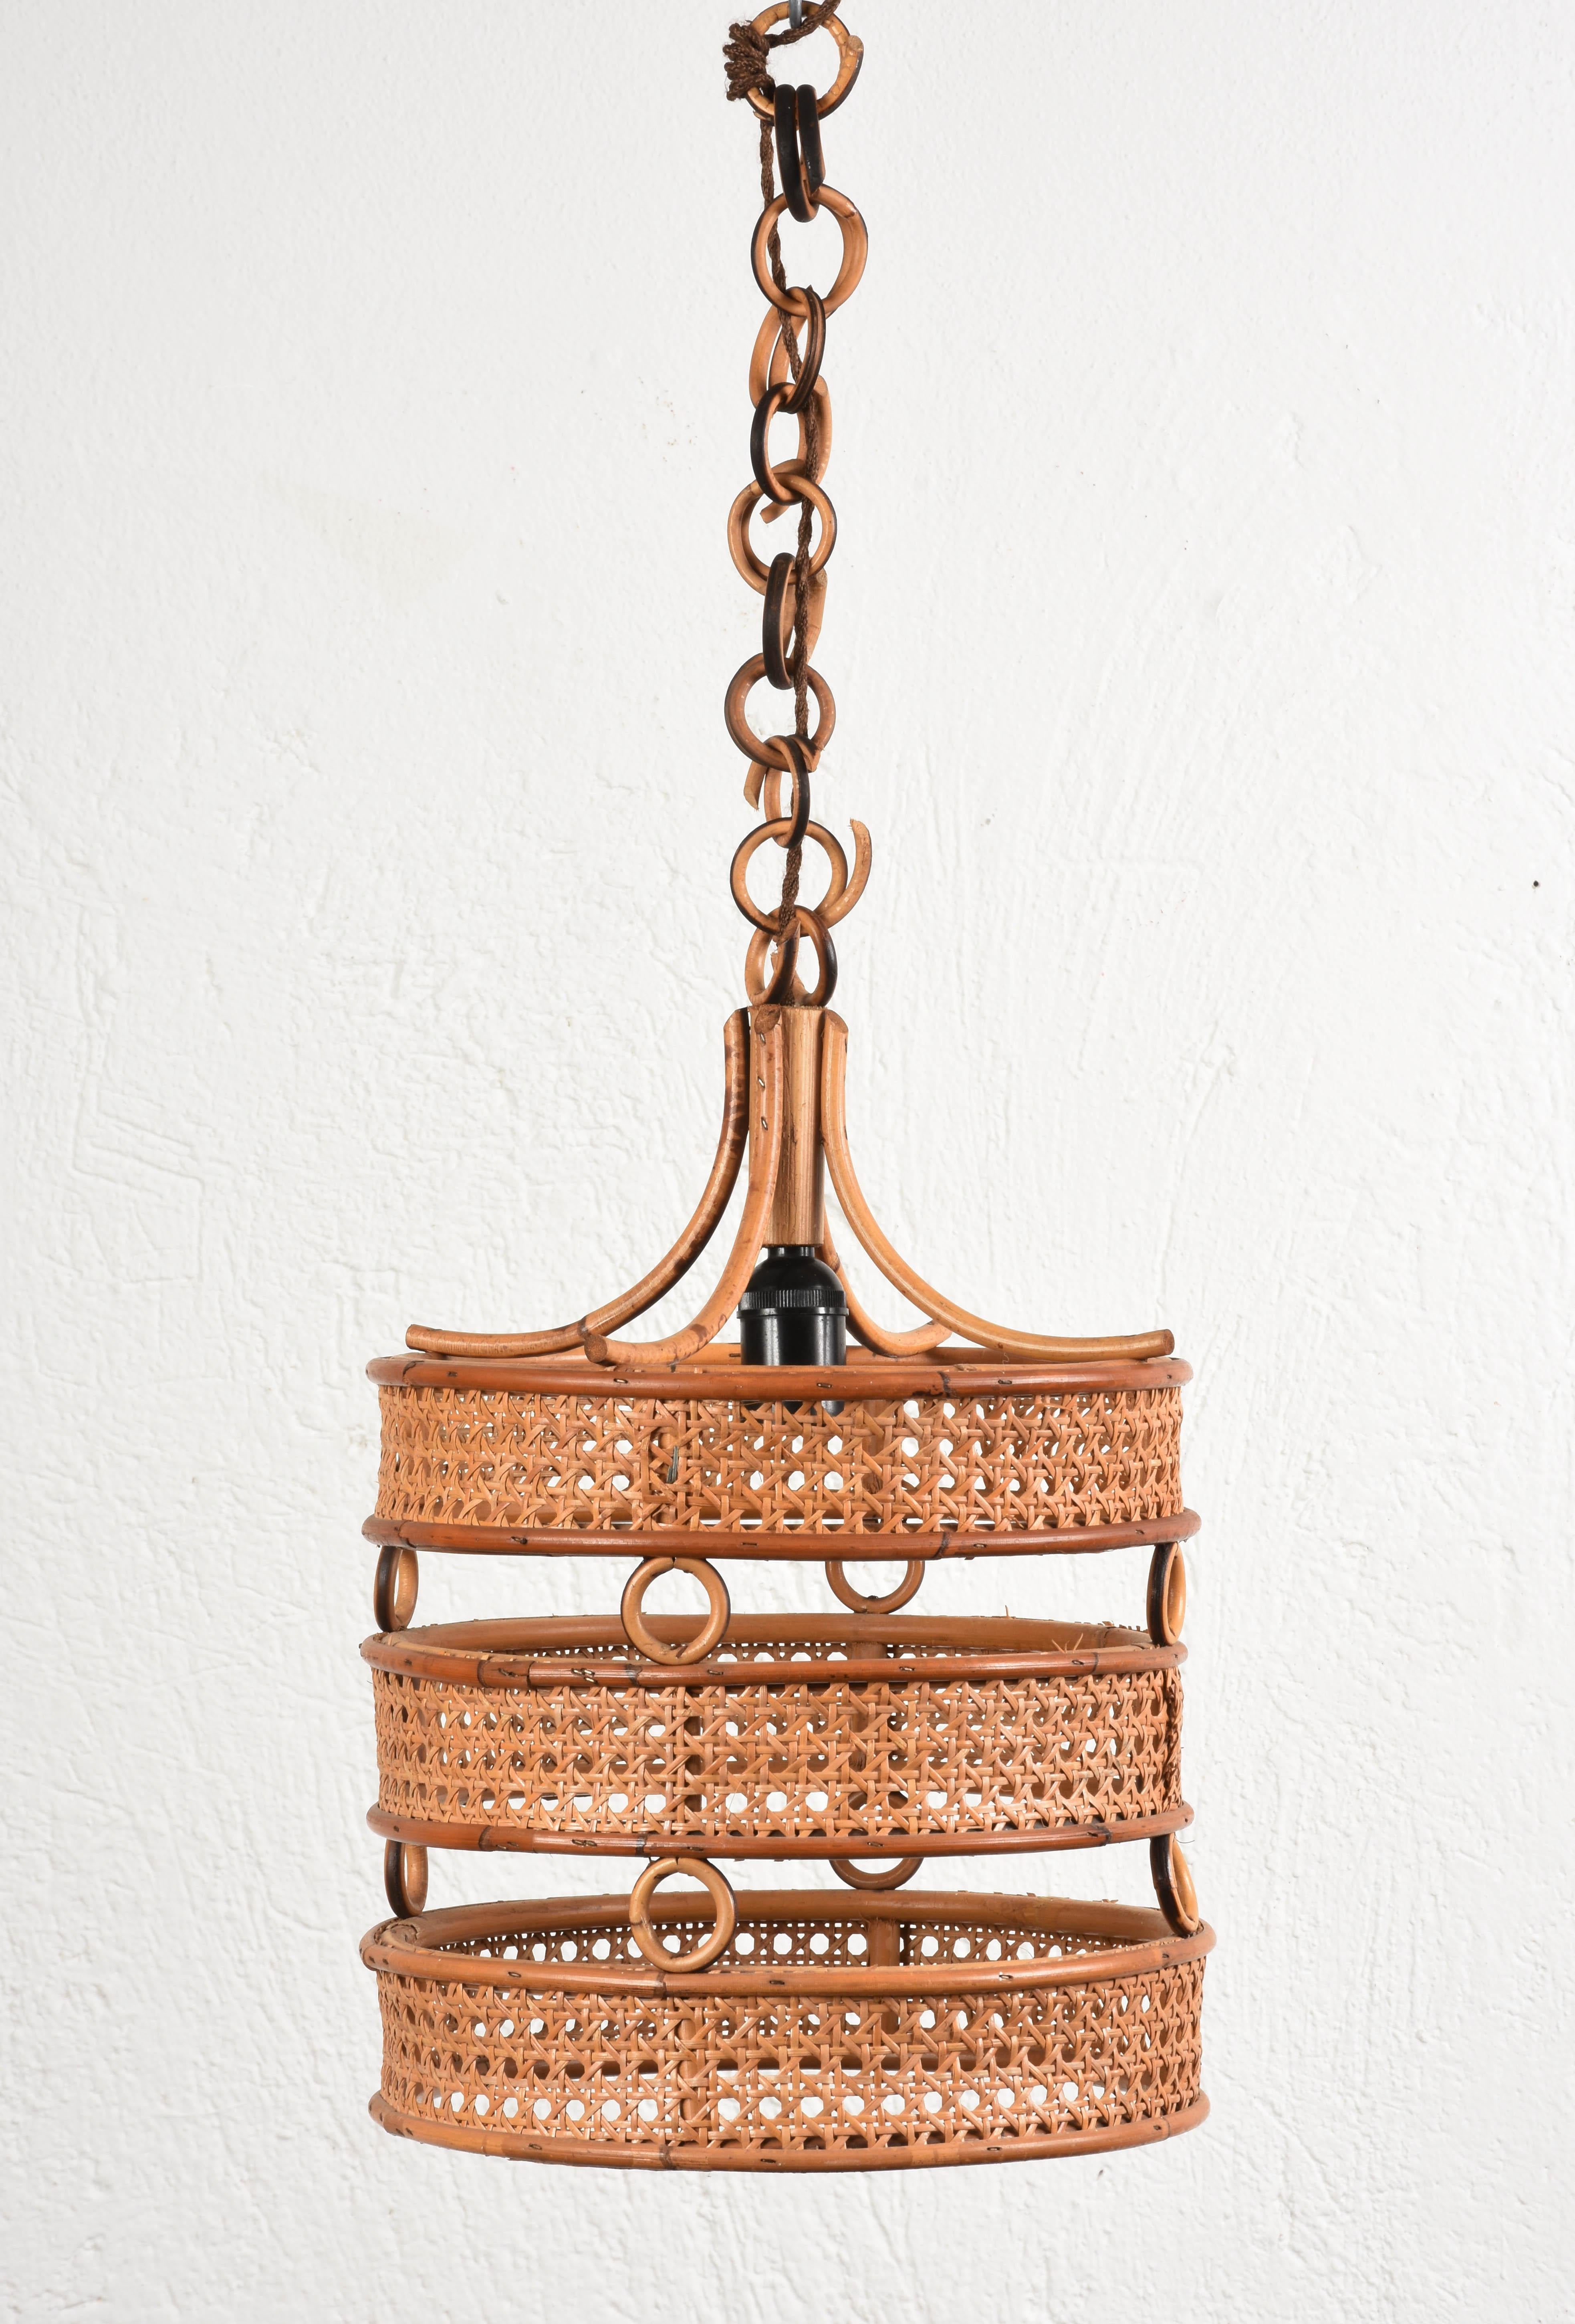 Wonderful rattan pendant chandelier in French riviera style, produced in Italy during the 1960s.

Its design is attributed to Franco Albini, a master designer who loved the use of rattan to create wonderful pieces.

This chandelier is perfect